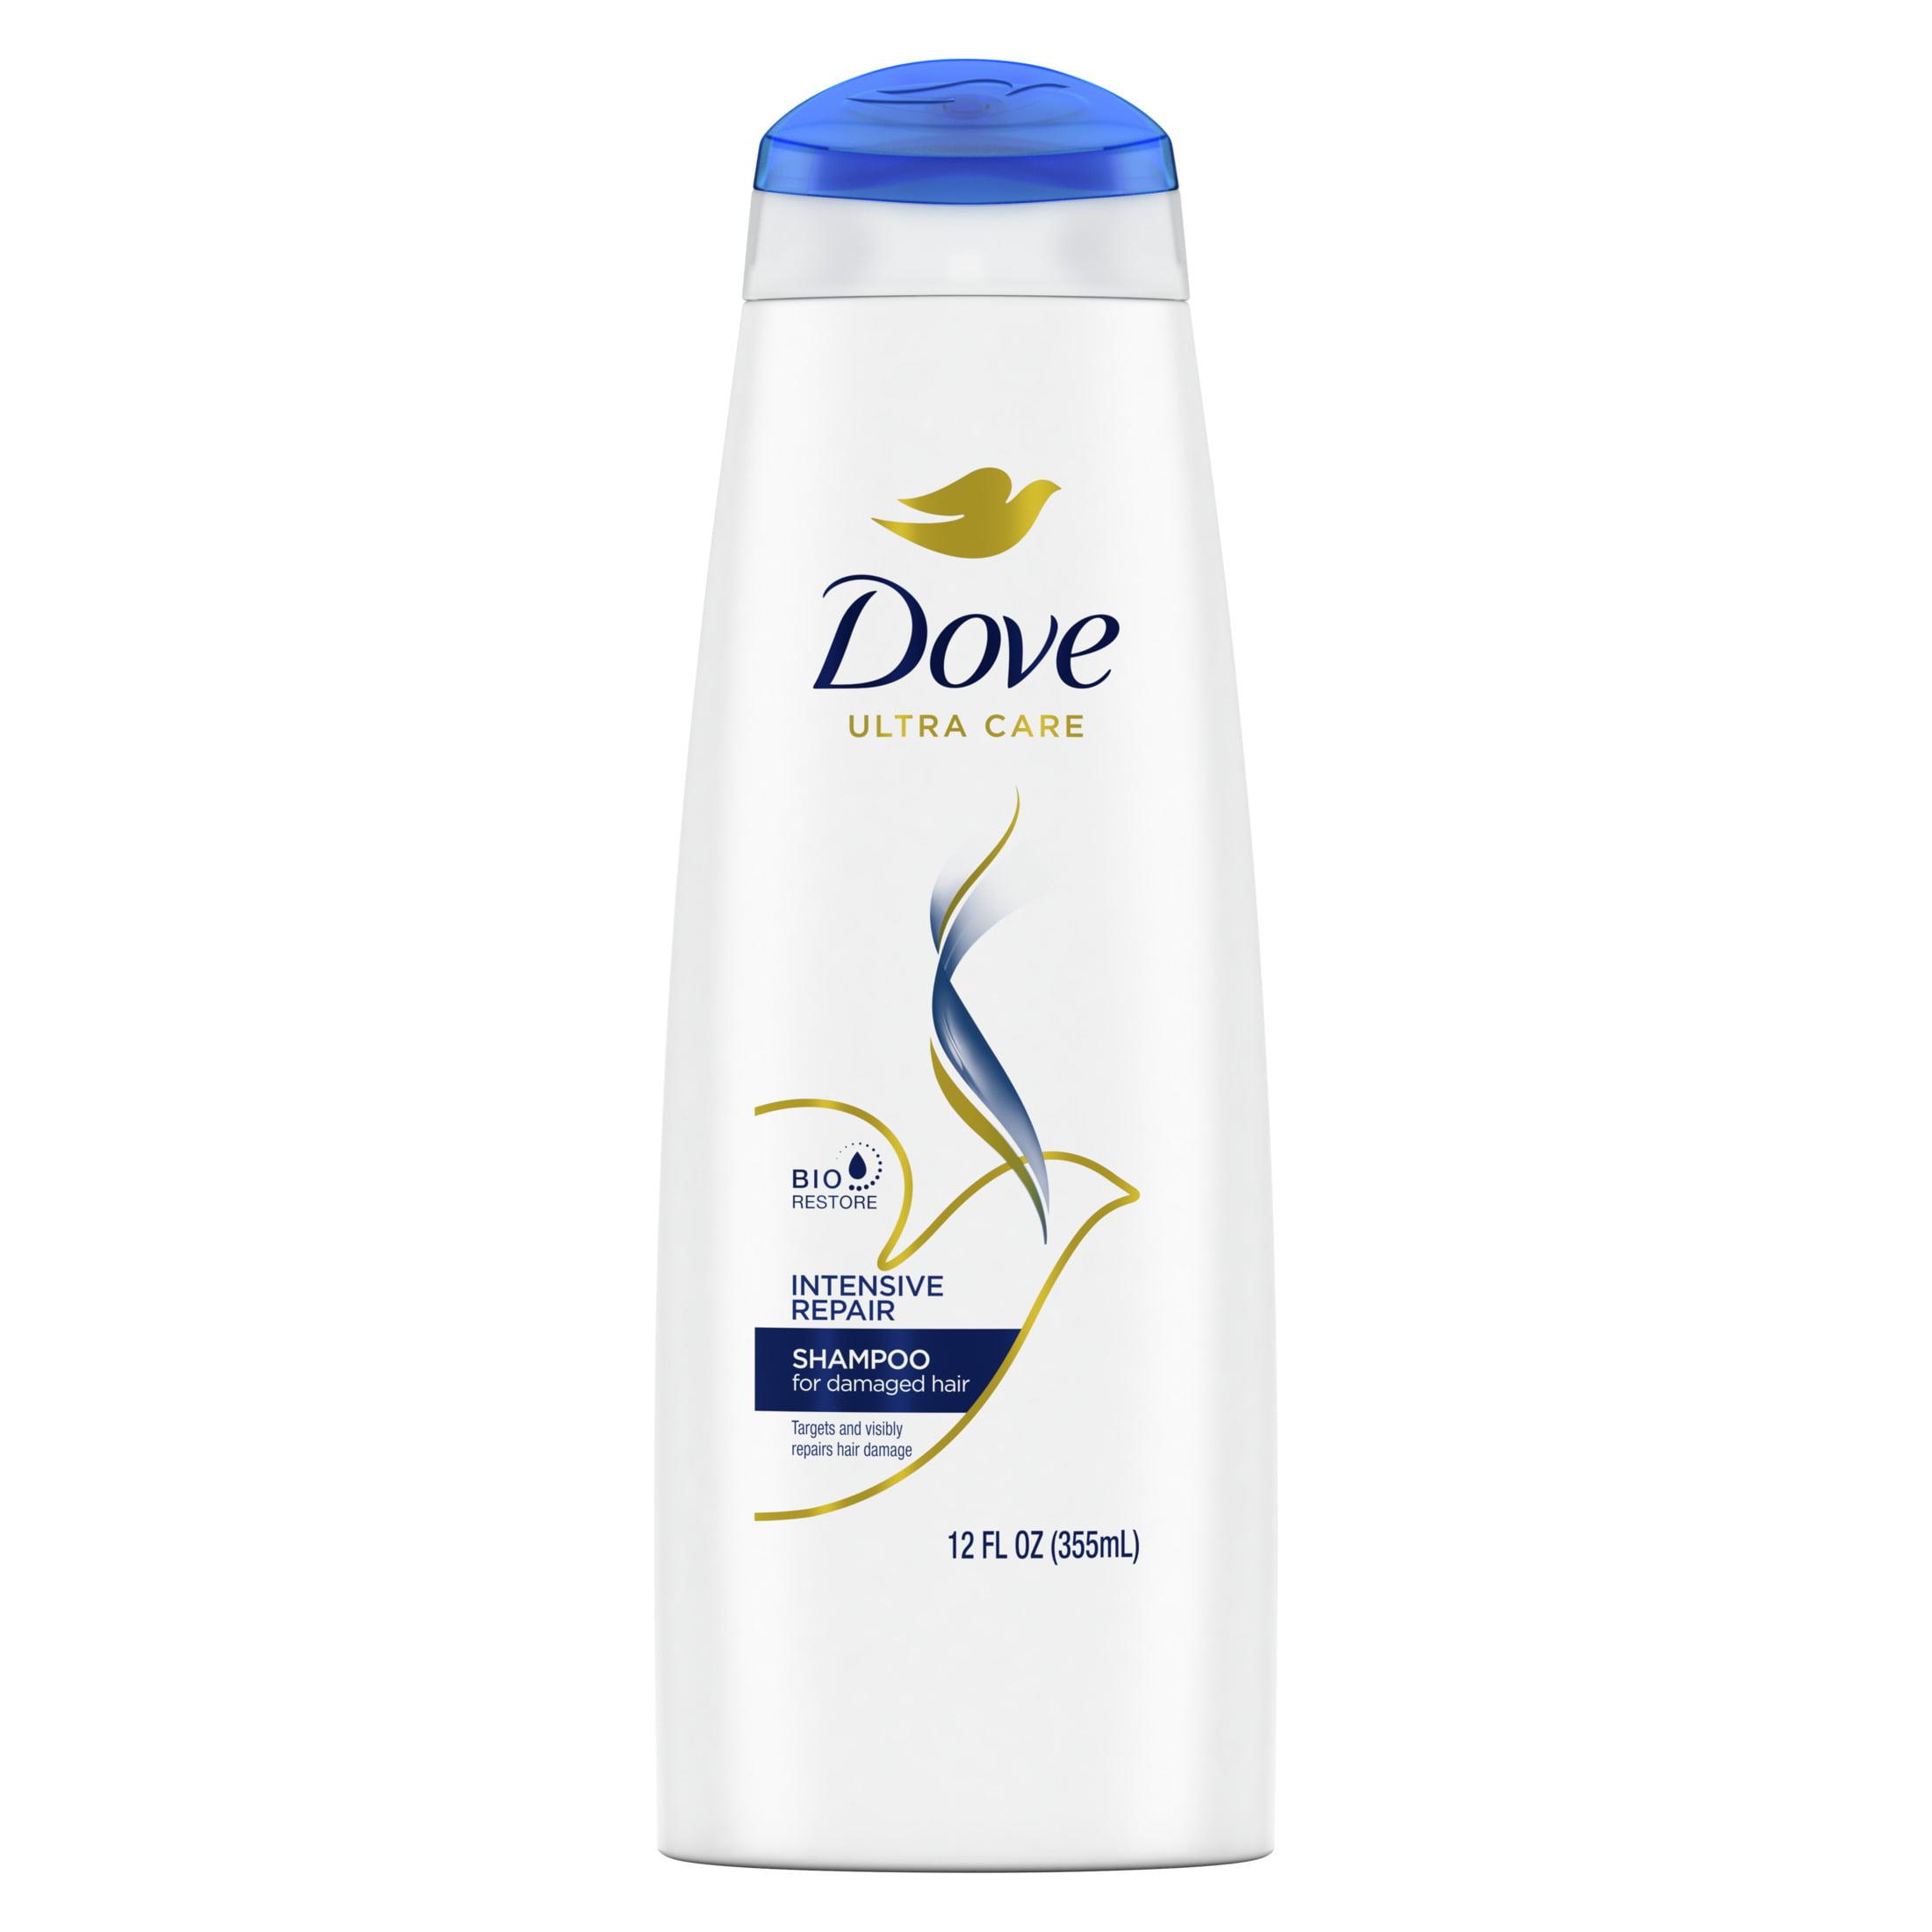 Dove Ultra Care Nourishing Intensive Repair Daily Shampoo for Damaged Hair, 12 fl oz - image 1 of 11